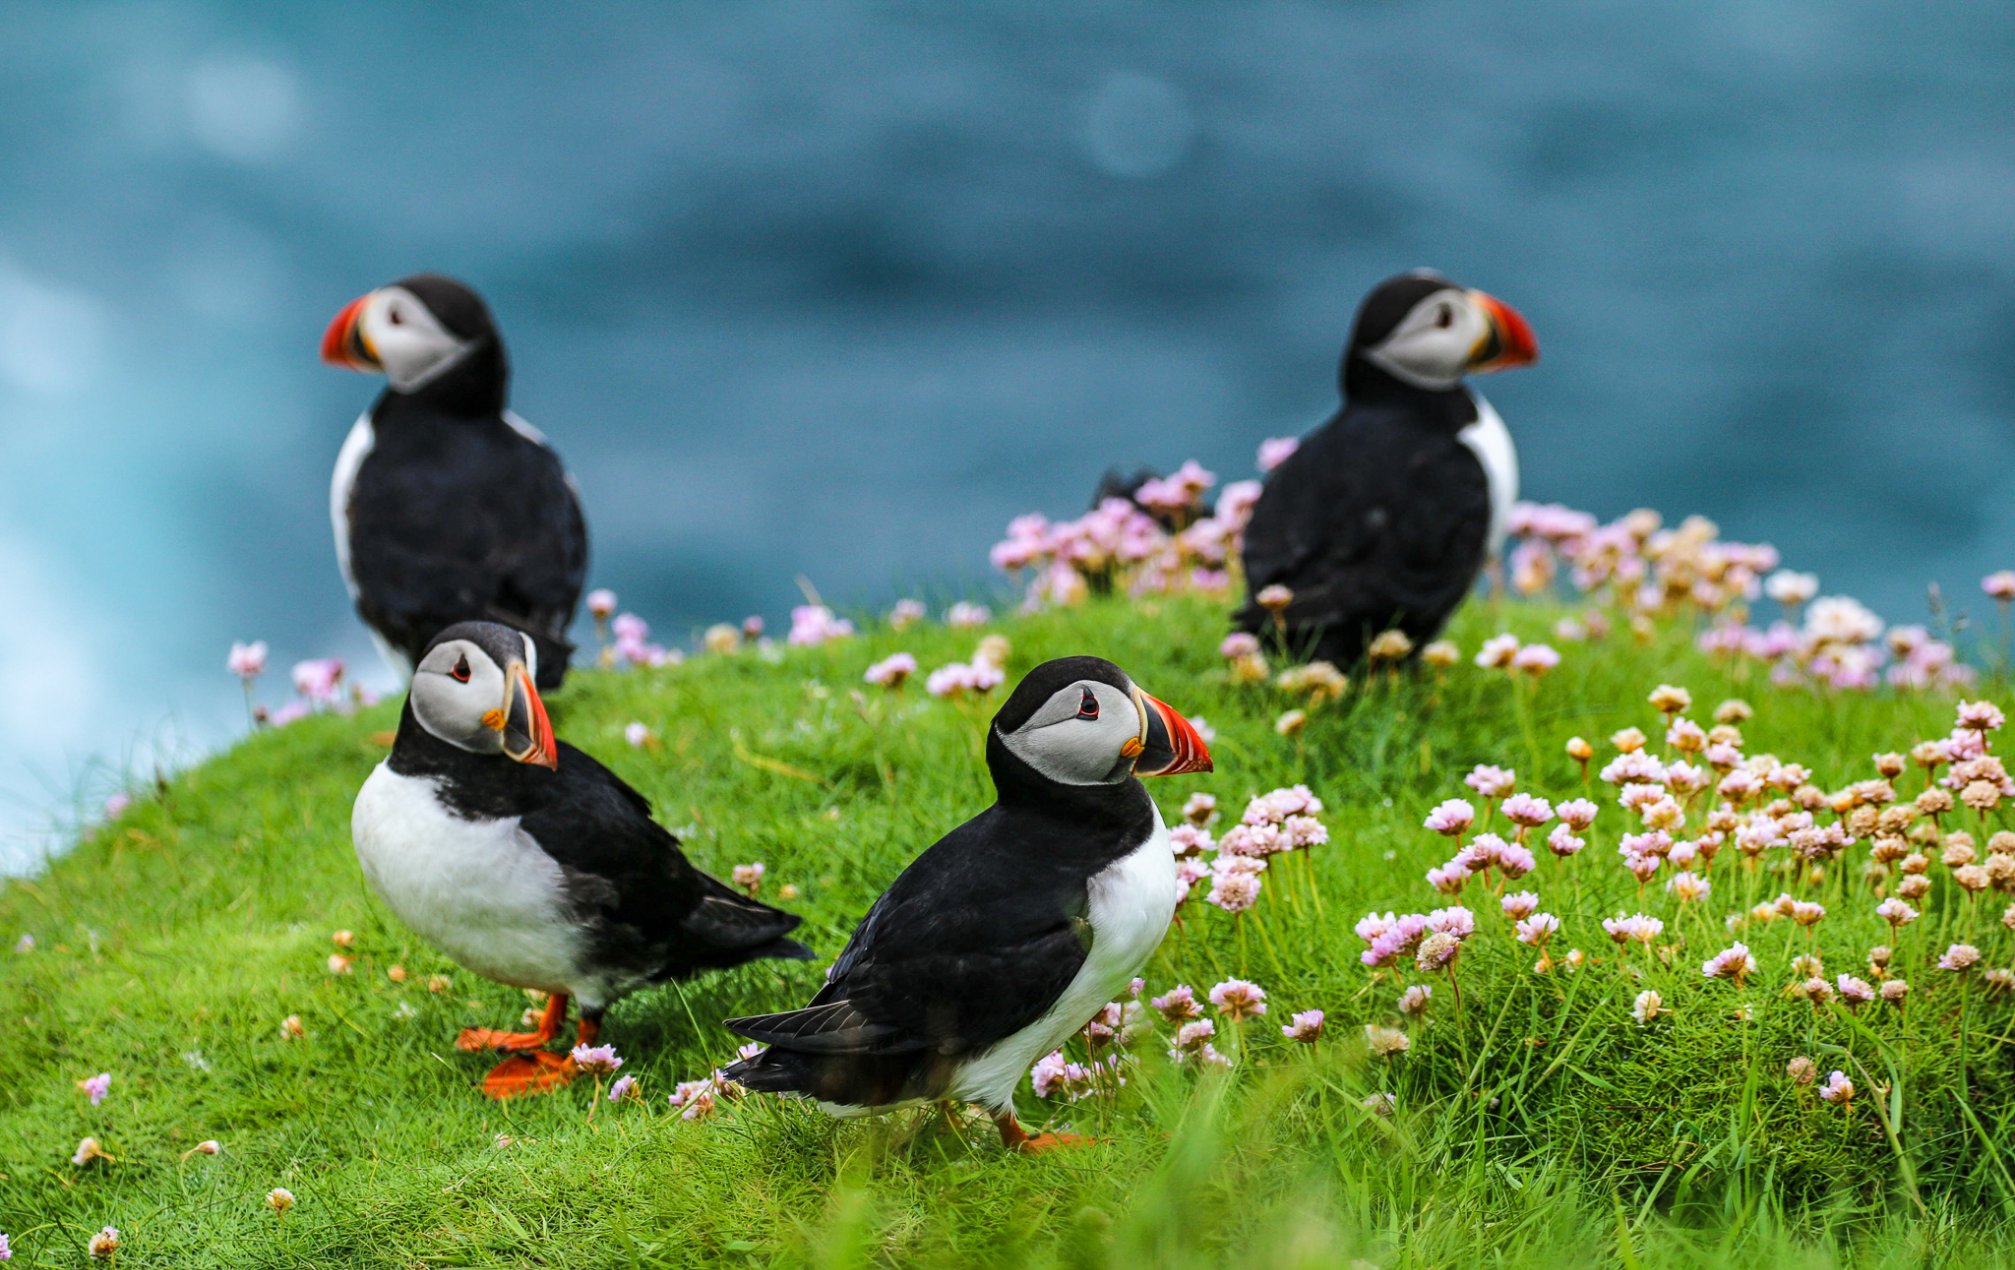 Puffins in Orkney - image by Graham Campbell